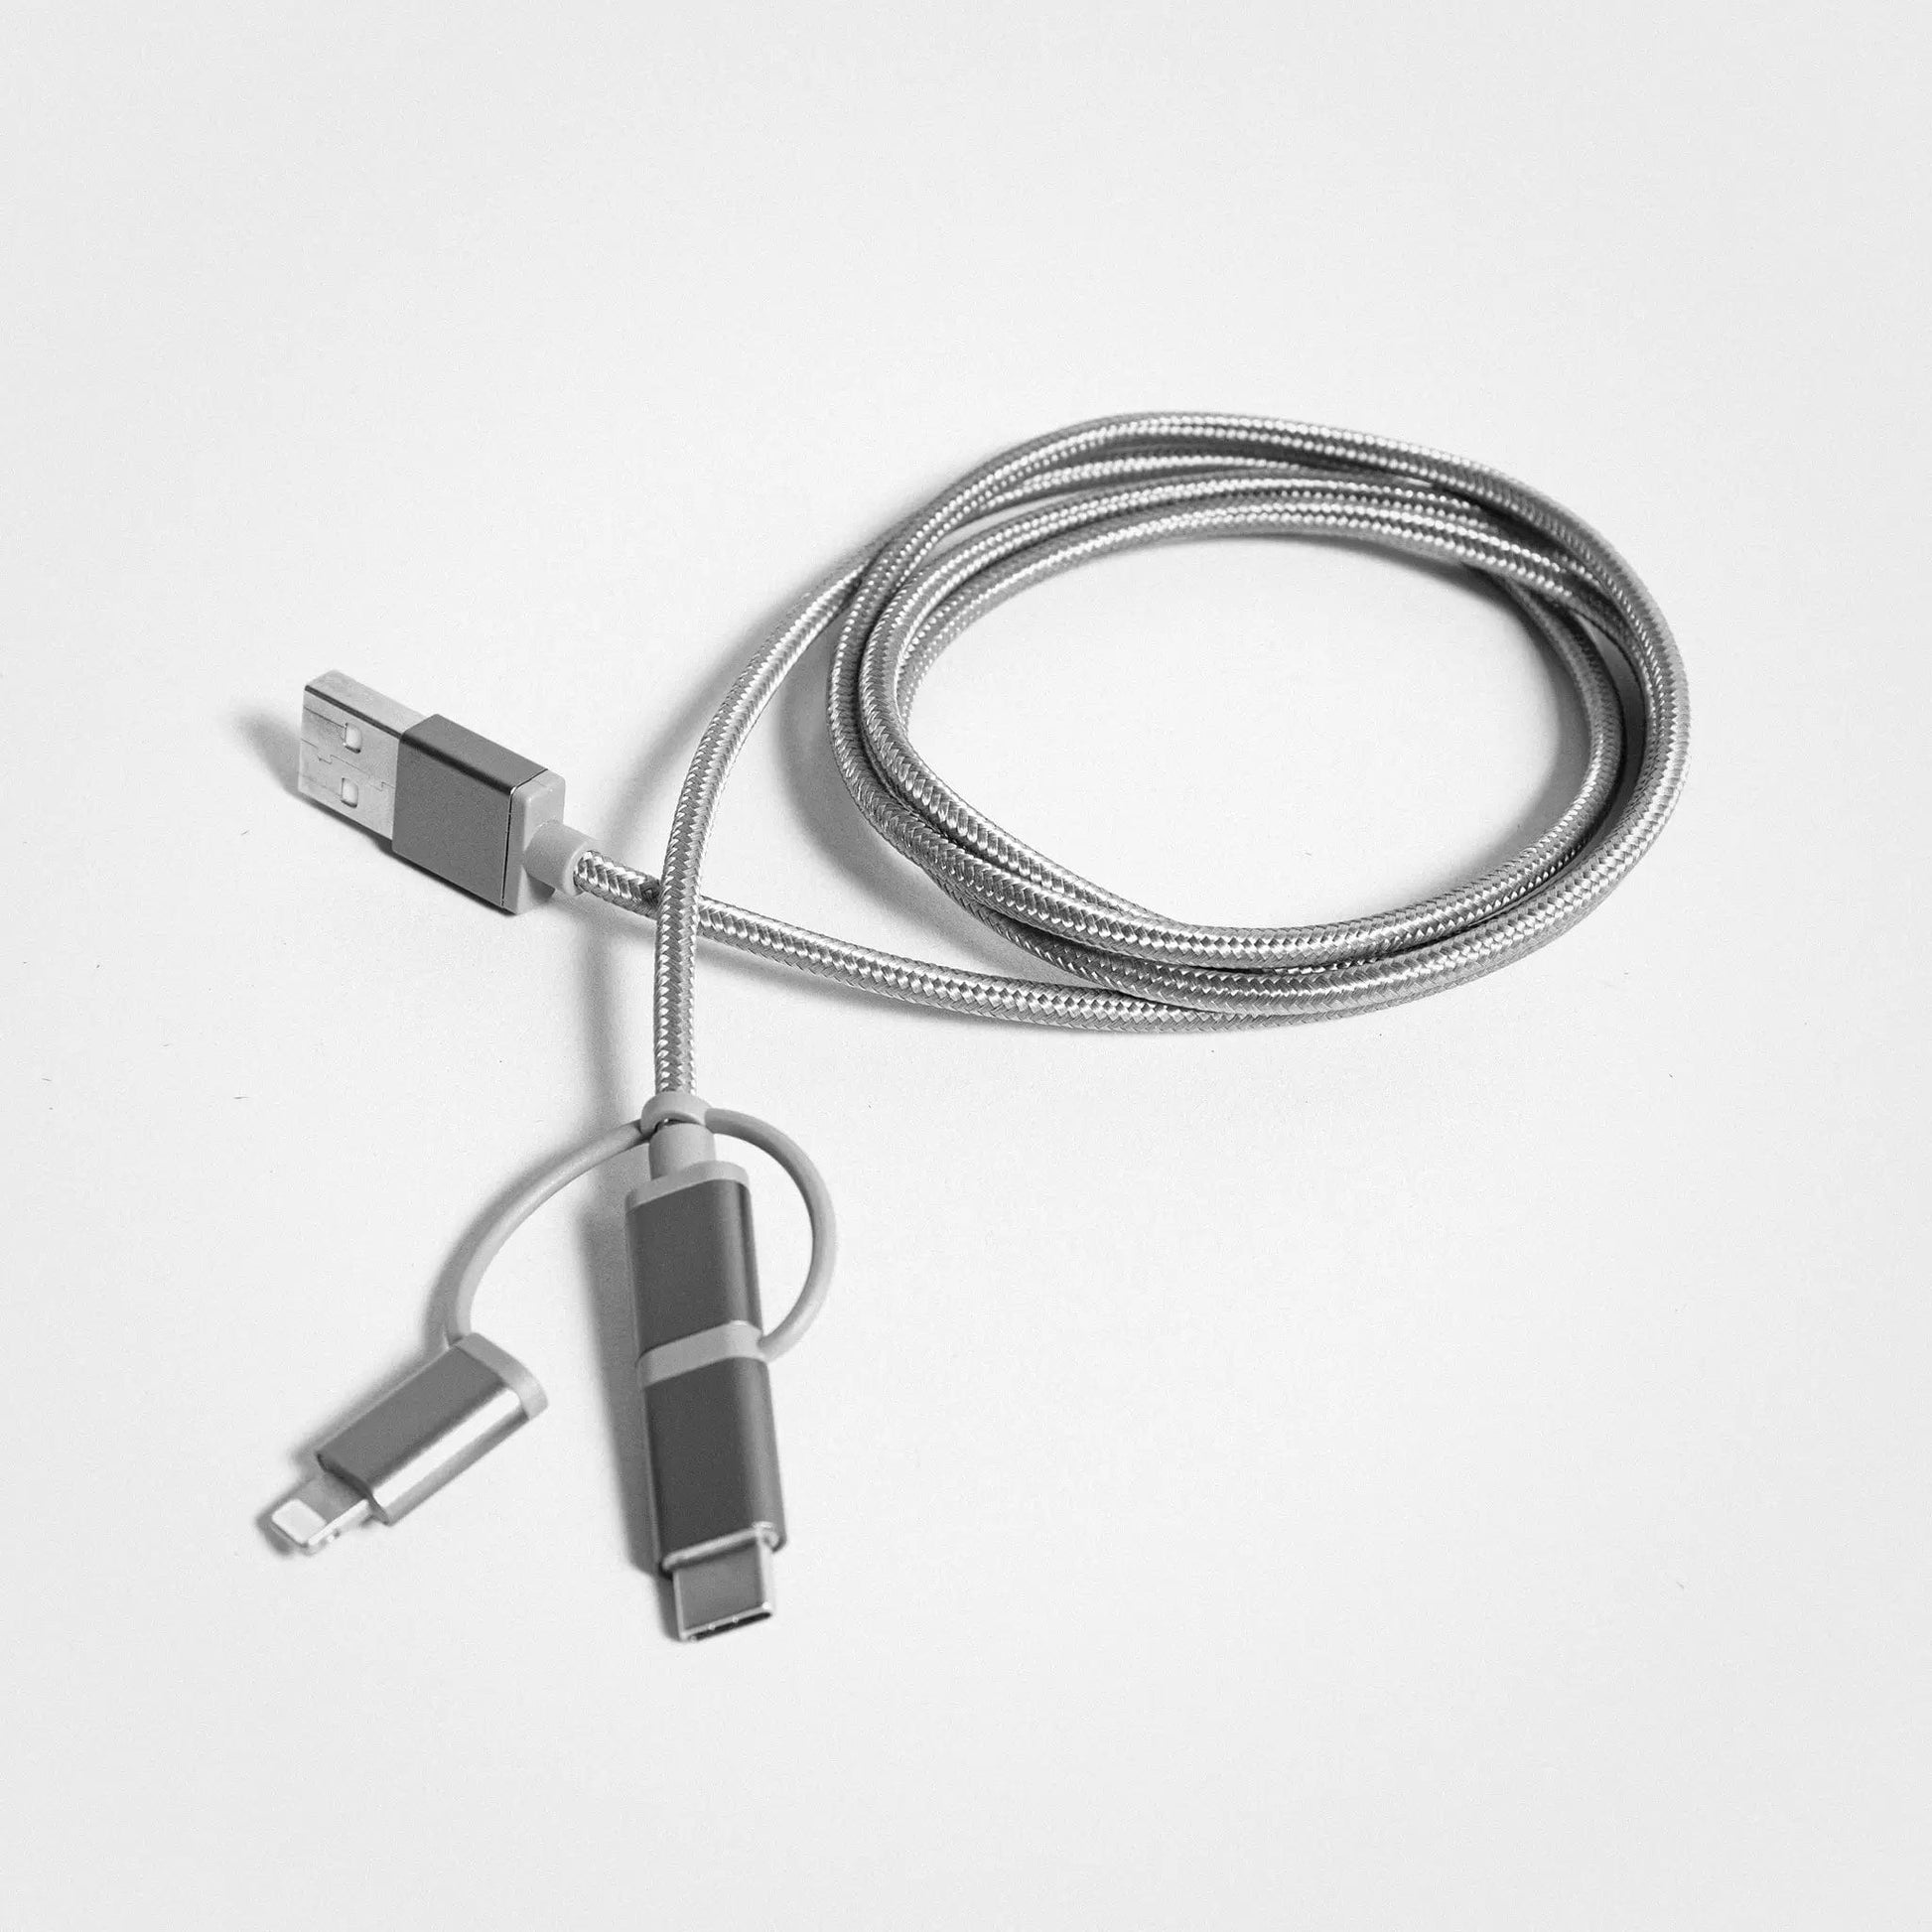 Iphone cable USB – GS Movil – Panamá